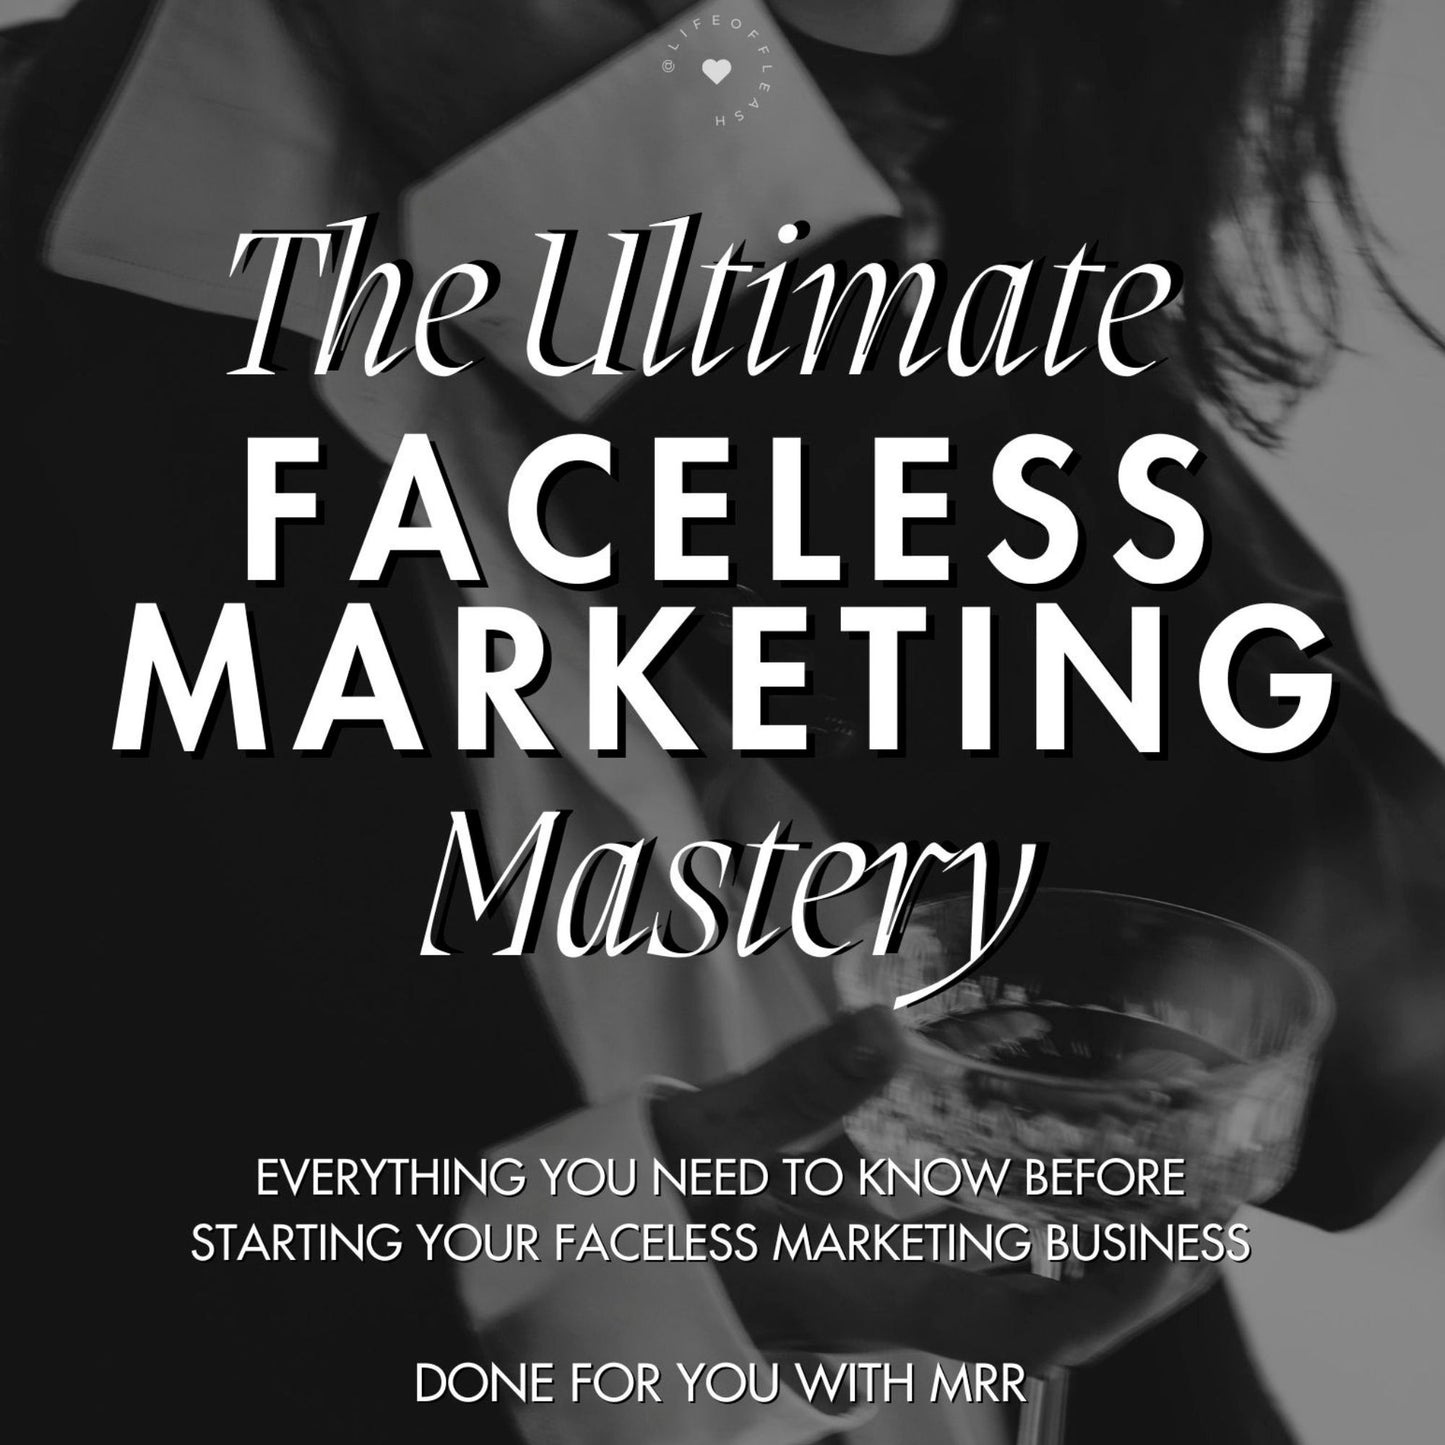 The Ultimate Faceless Marketing Mastery Guide